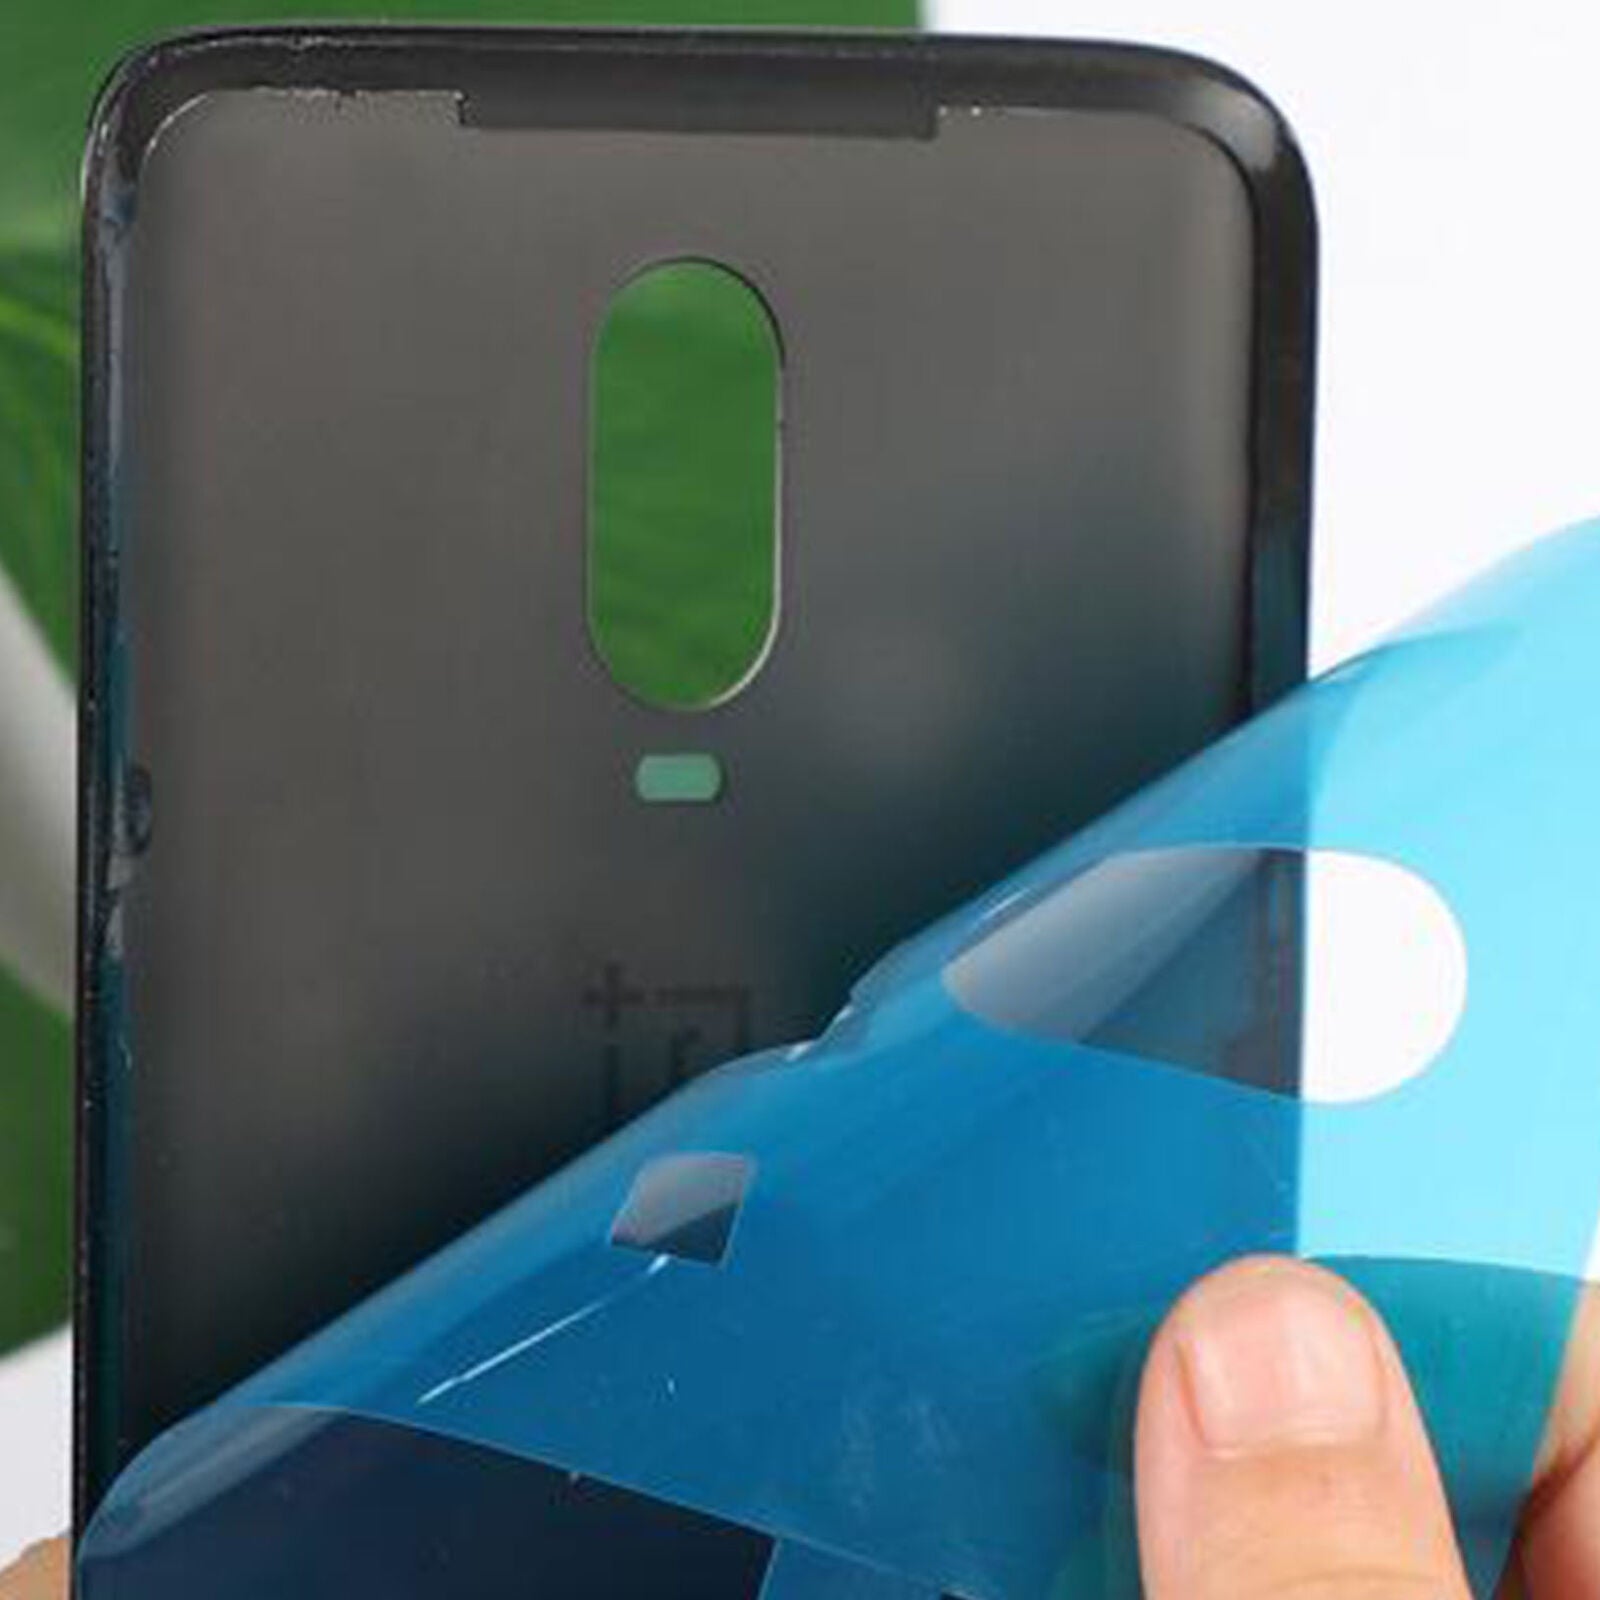 Back Battery Door Cover Glass Case Housing Replacement For OnePlus 6T